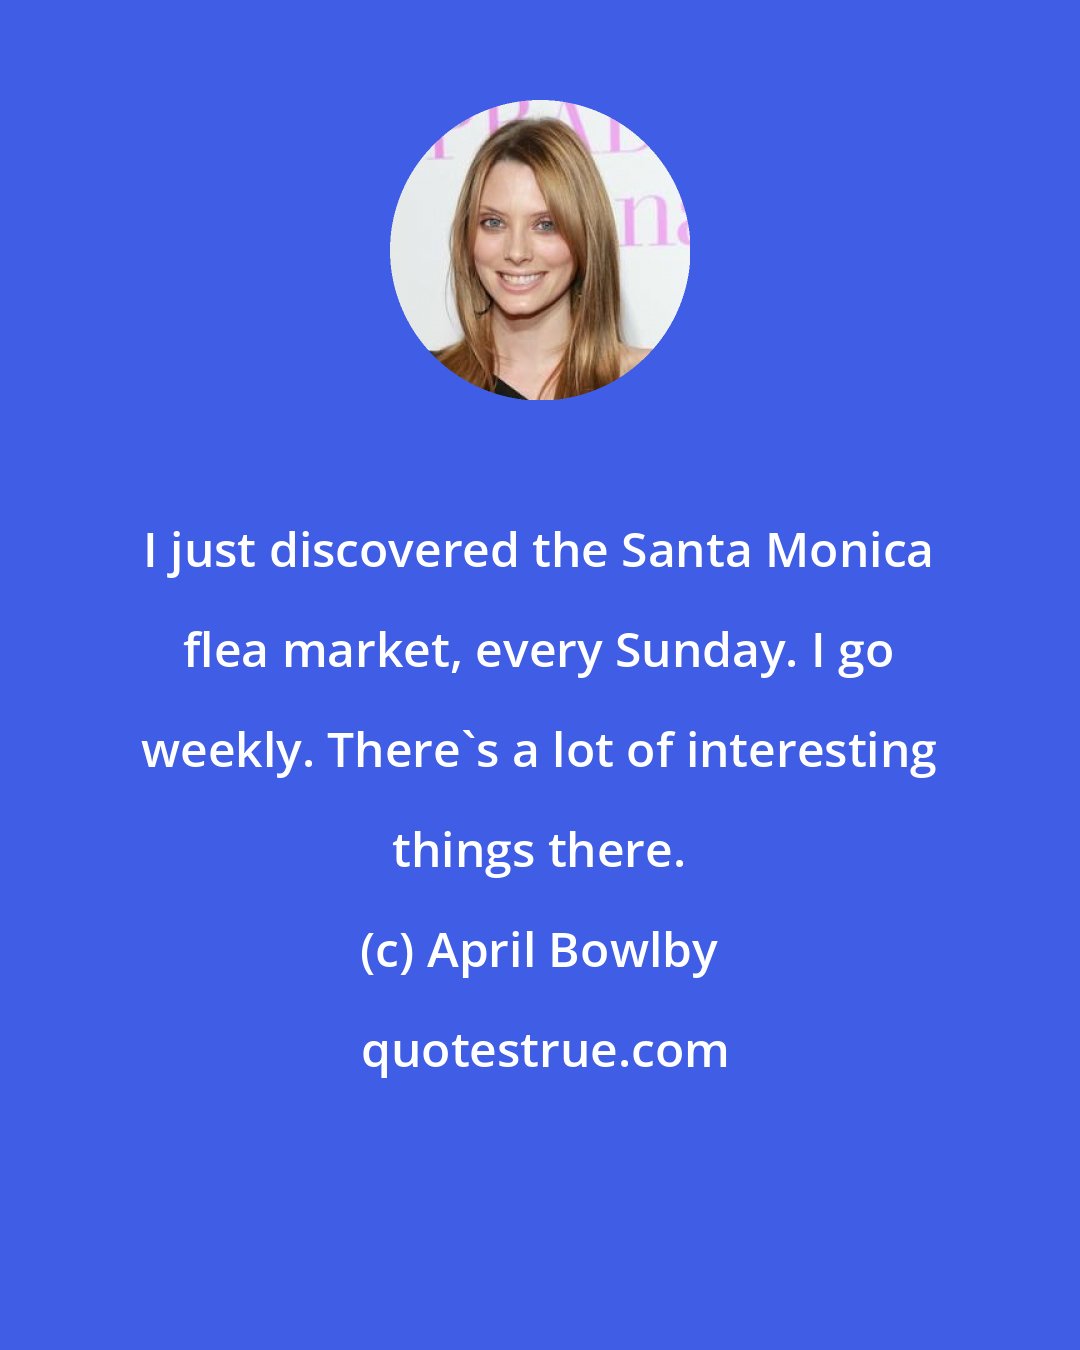 April Bowlby: I just discovered the Santa Monica flea market, every Sunday. I go weekly. There's a lot of interesting things there.